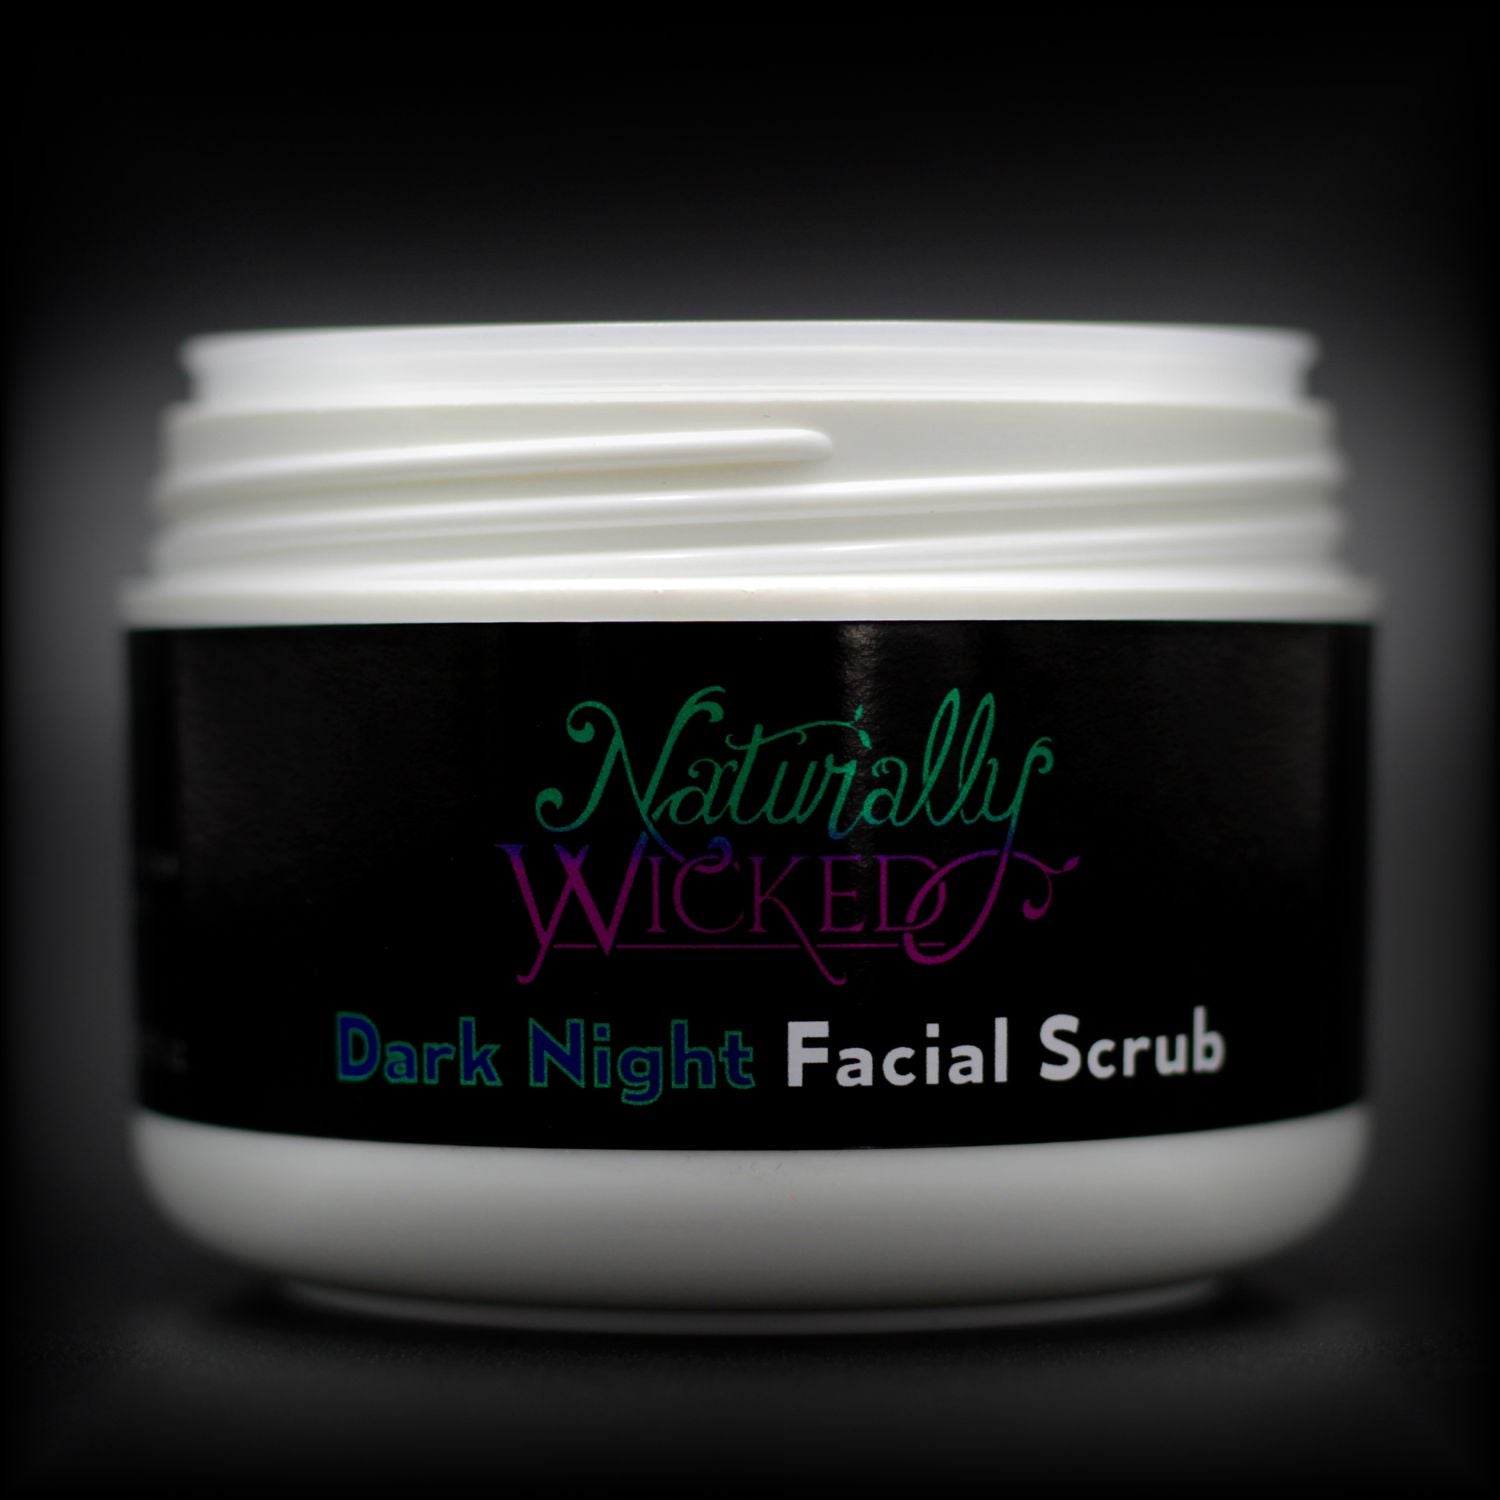 Naturally Wicked Dark Night Facial Scrub Container, Seal & Screw Connection Without Lid